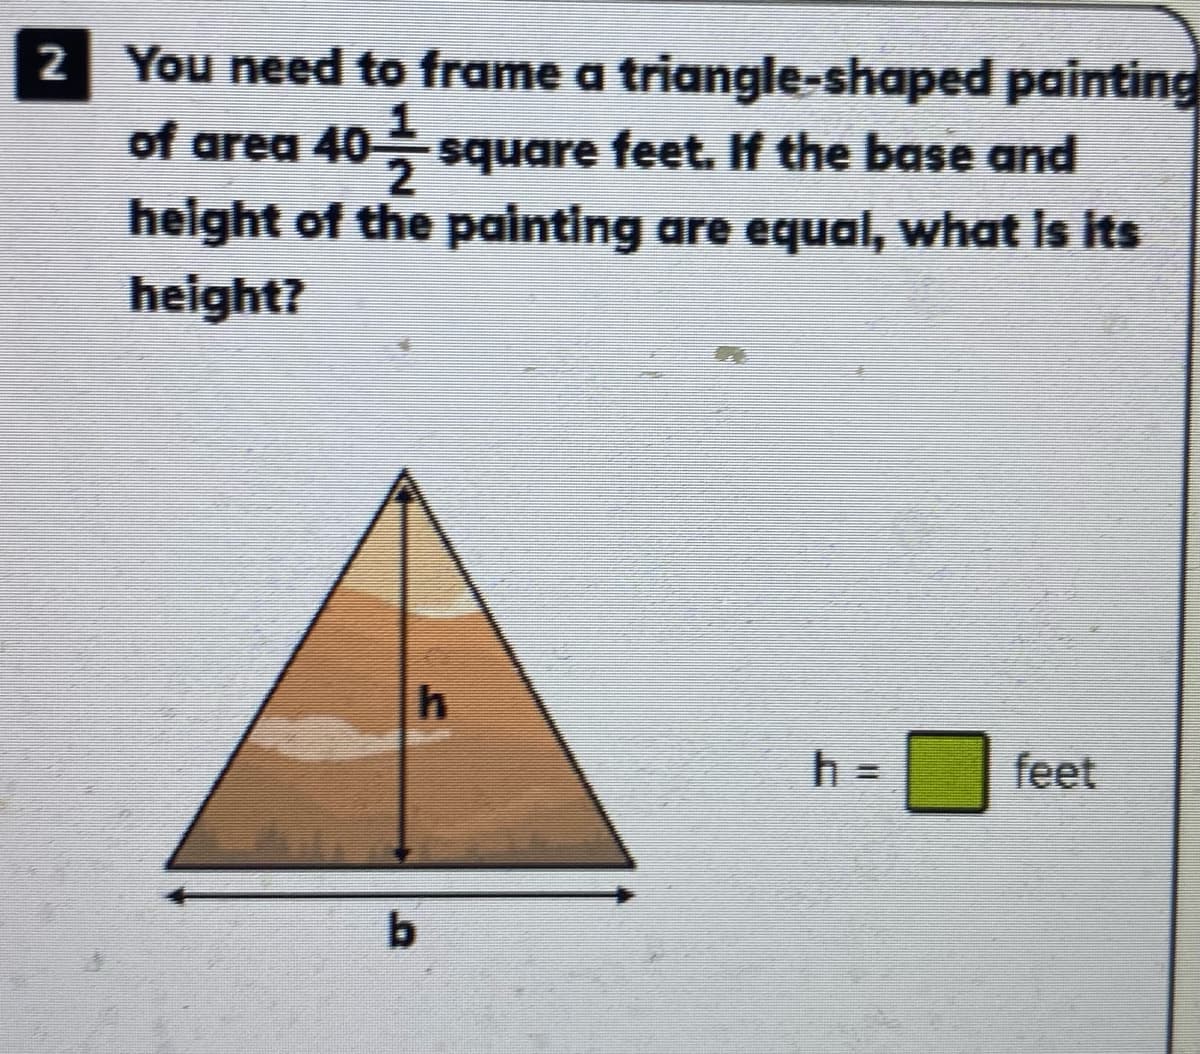 2 You need to frame a triangle-shaped painting
of area 40 square feet. If the base and
height of the painting are equal, what is its
height?
h =
feet
b.
